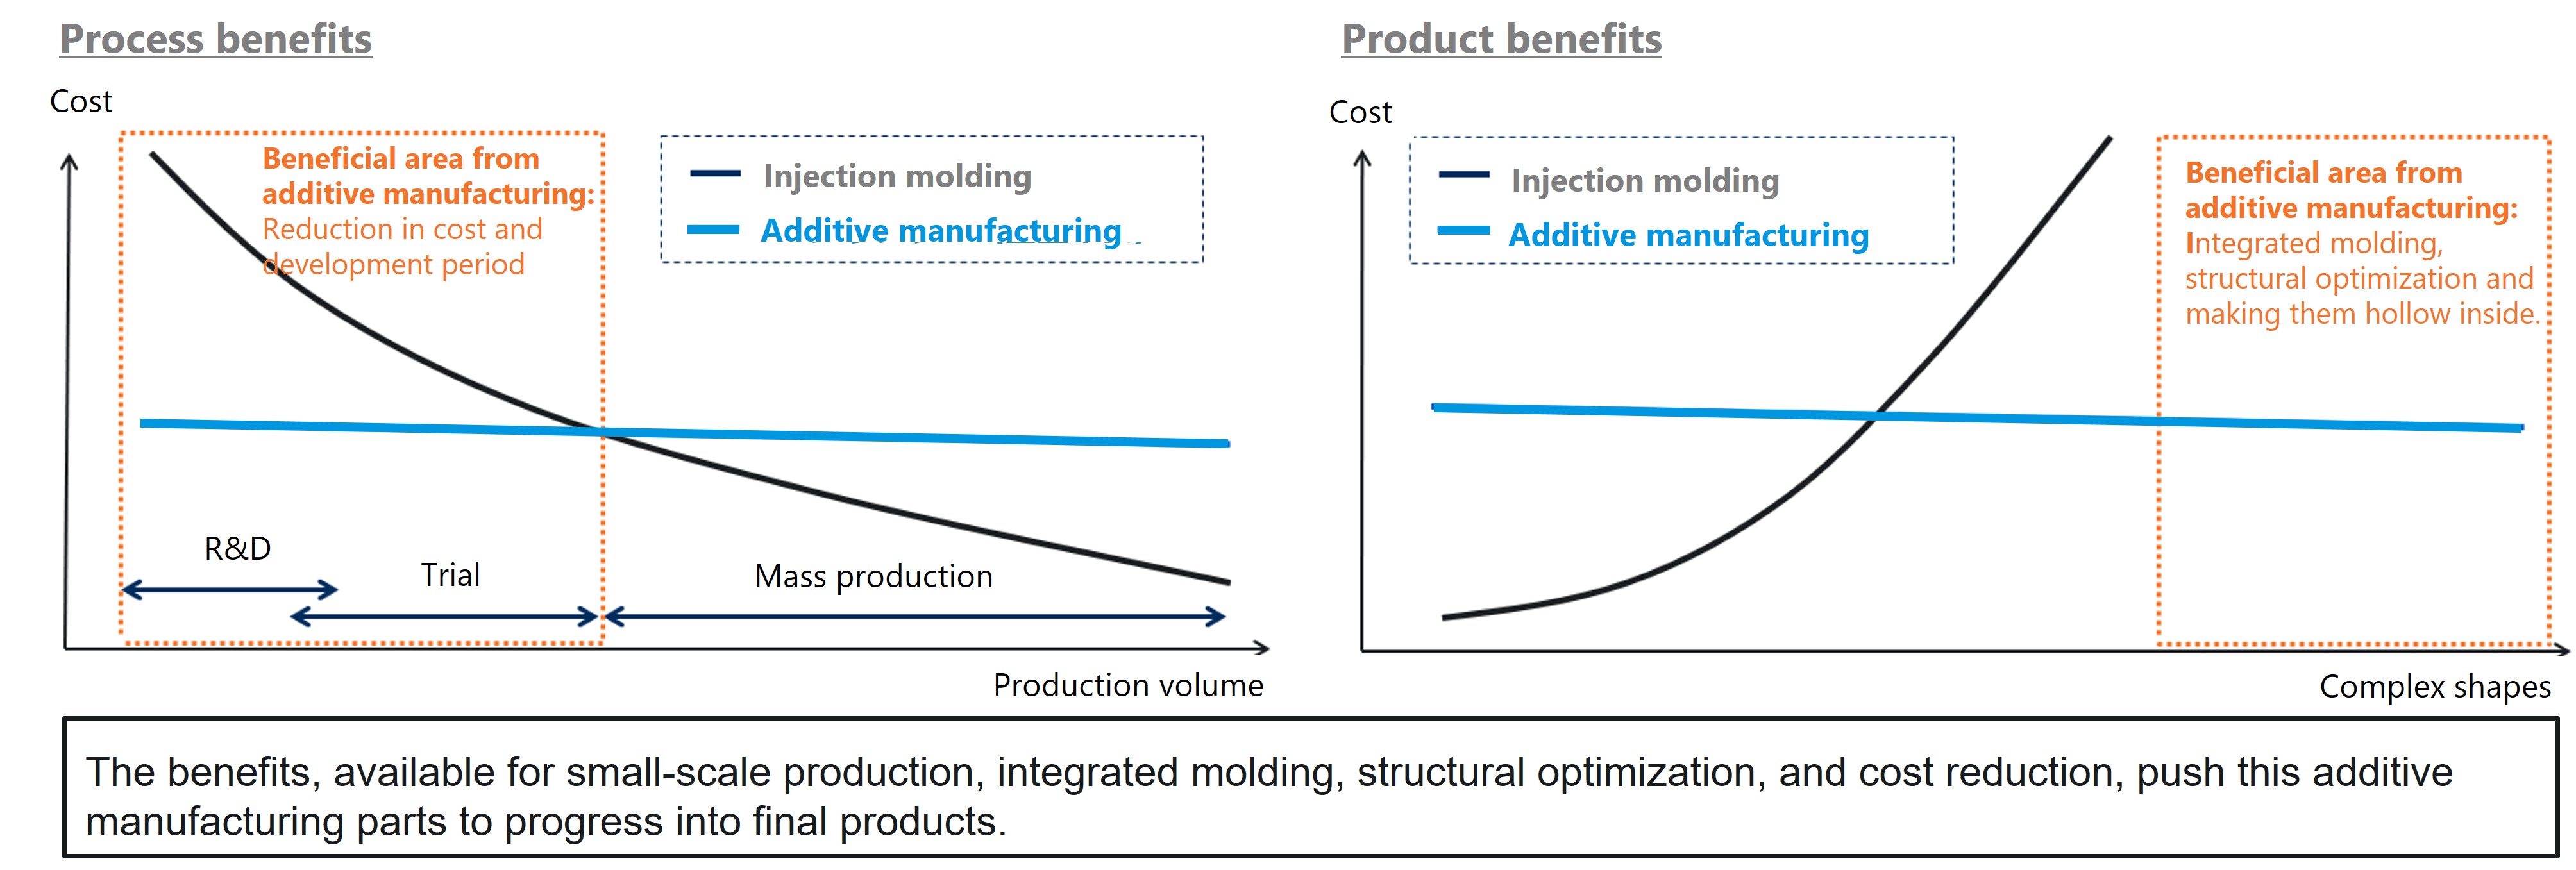 Process and product benefits from additive manufacturing